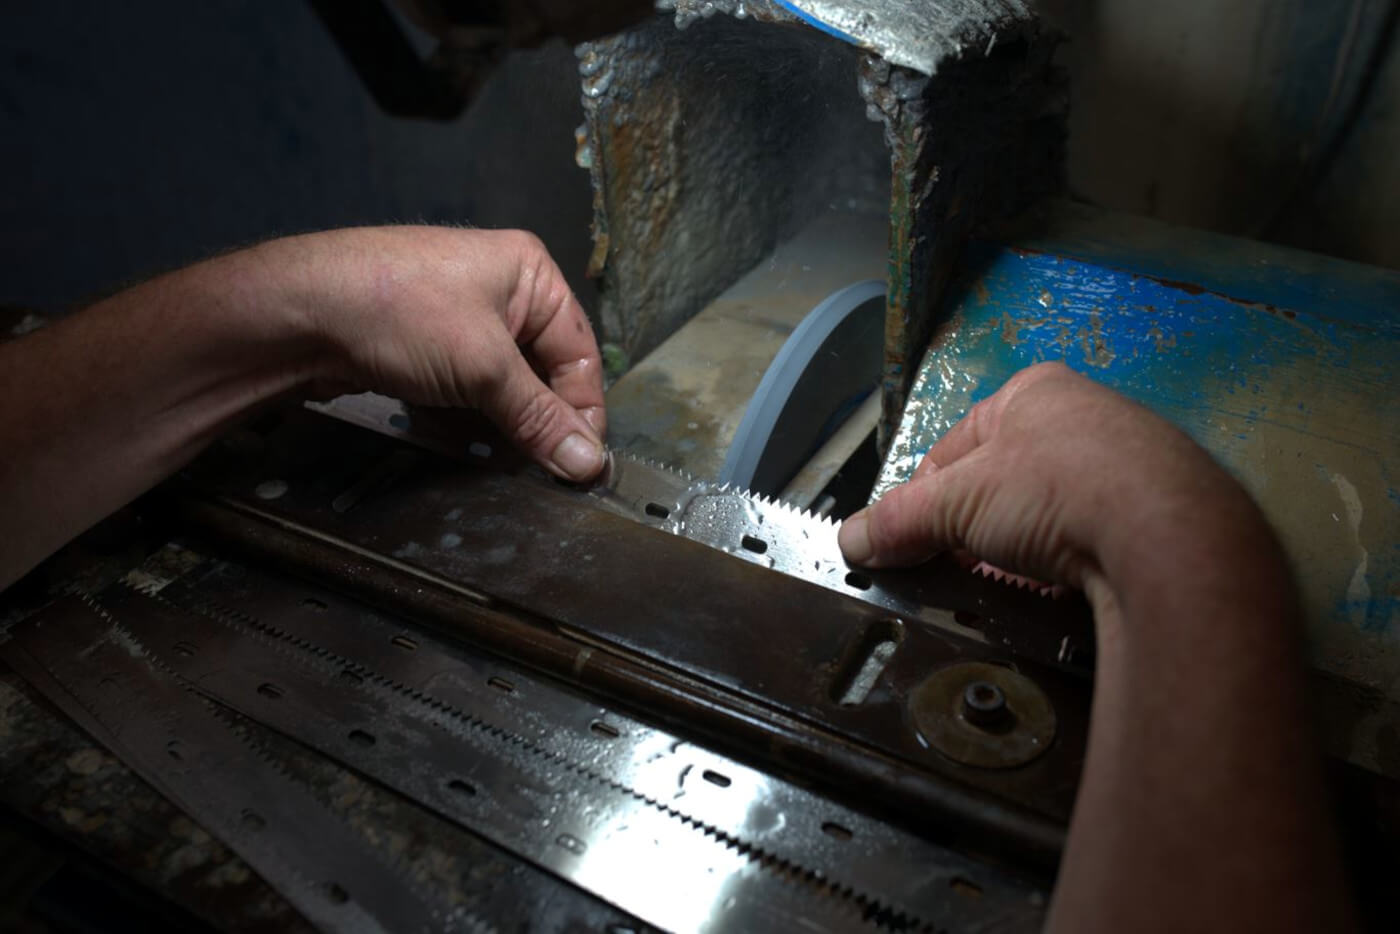 Engineer's hands sharpening a saw-toothed machine knife on a grinding wheel